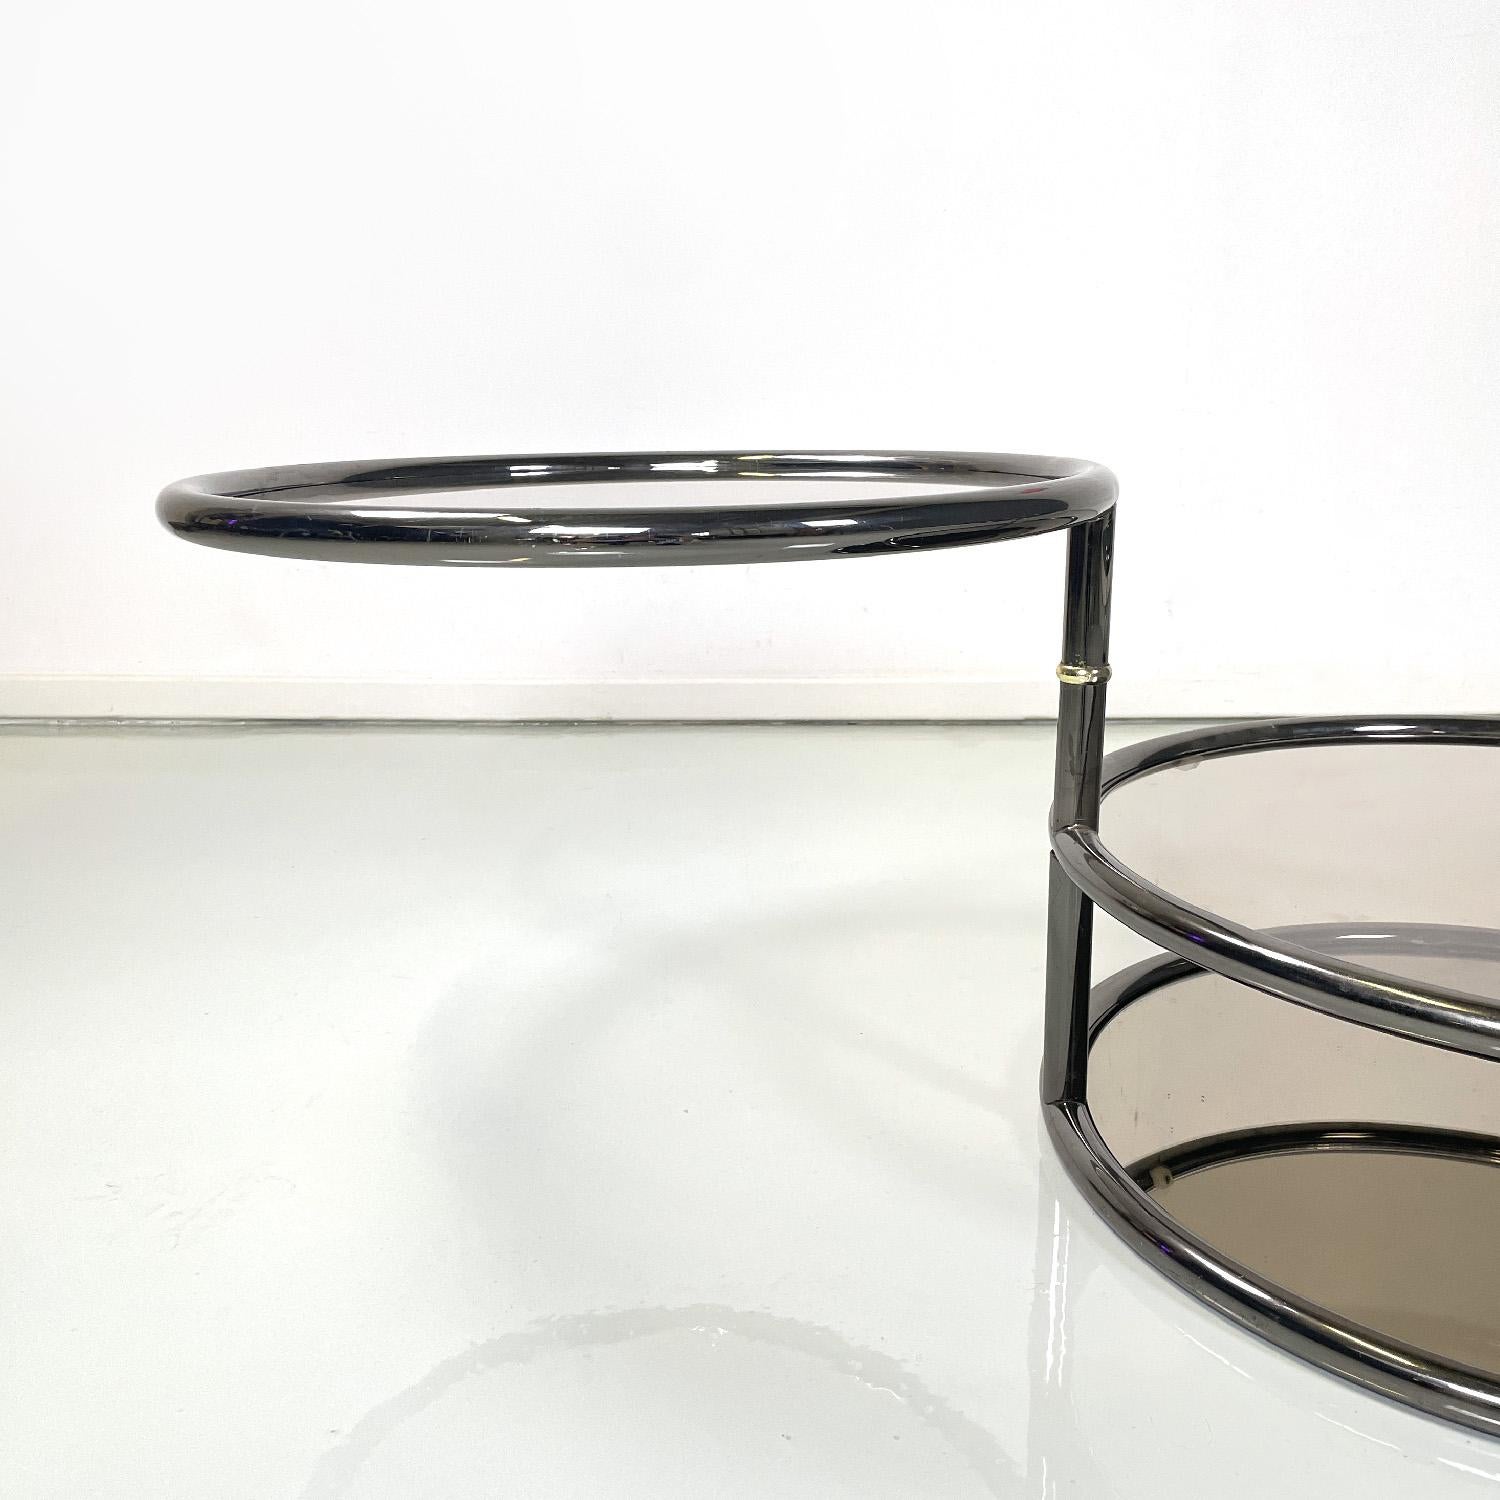 Italian modern coffee table in smoked glass and metal with swivel tops, 1970s For Sale 5